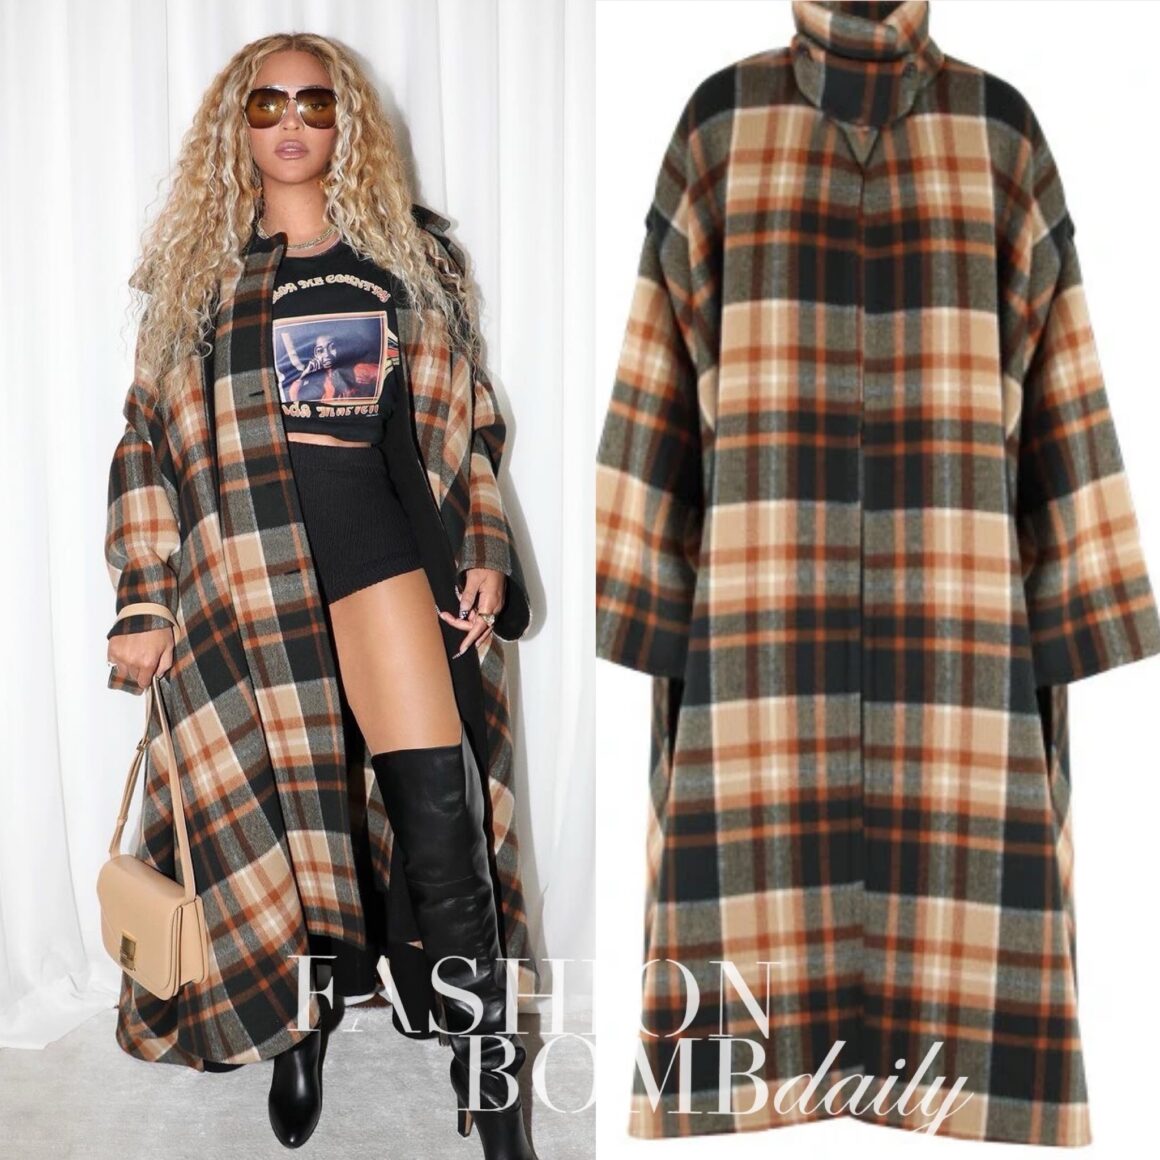 8888 Beyonce Promotes Cowboy Carter in a Chloe Oversized Plaid Cape A Linda Martell Color me Country Tee Black Prada Knit Shorts and a Ferragamo Bag